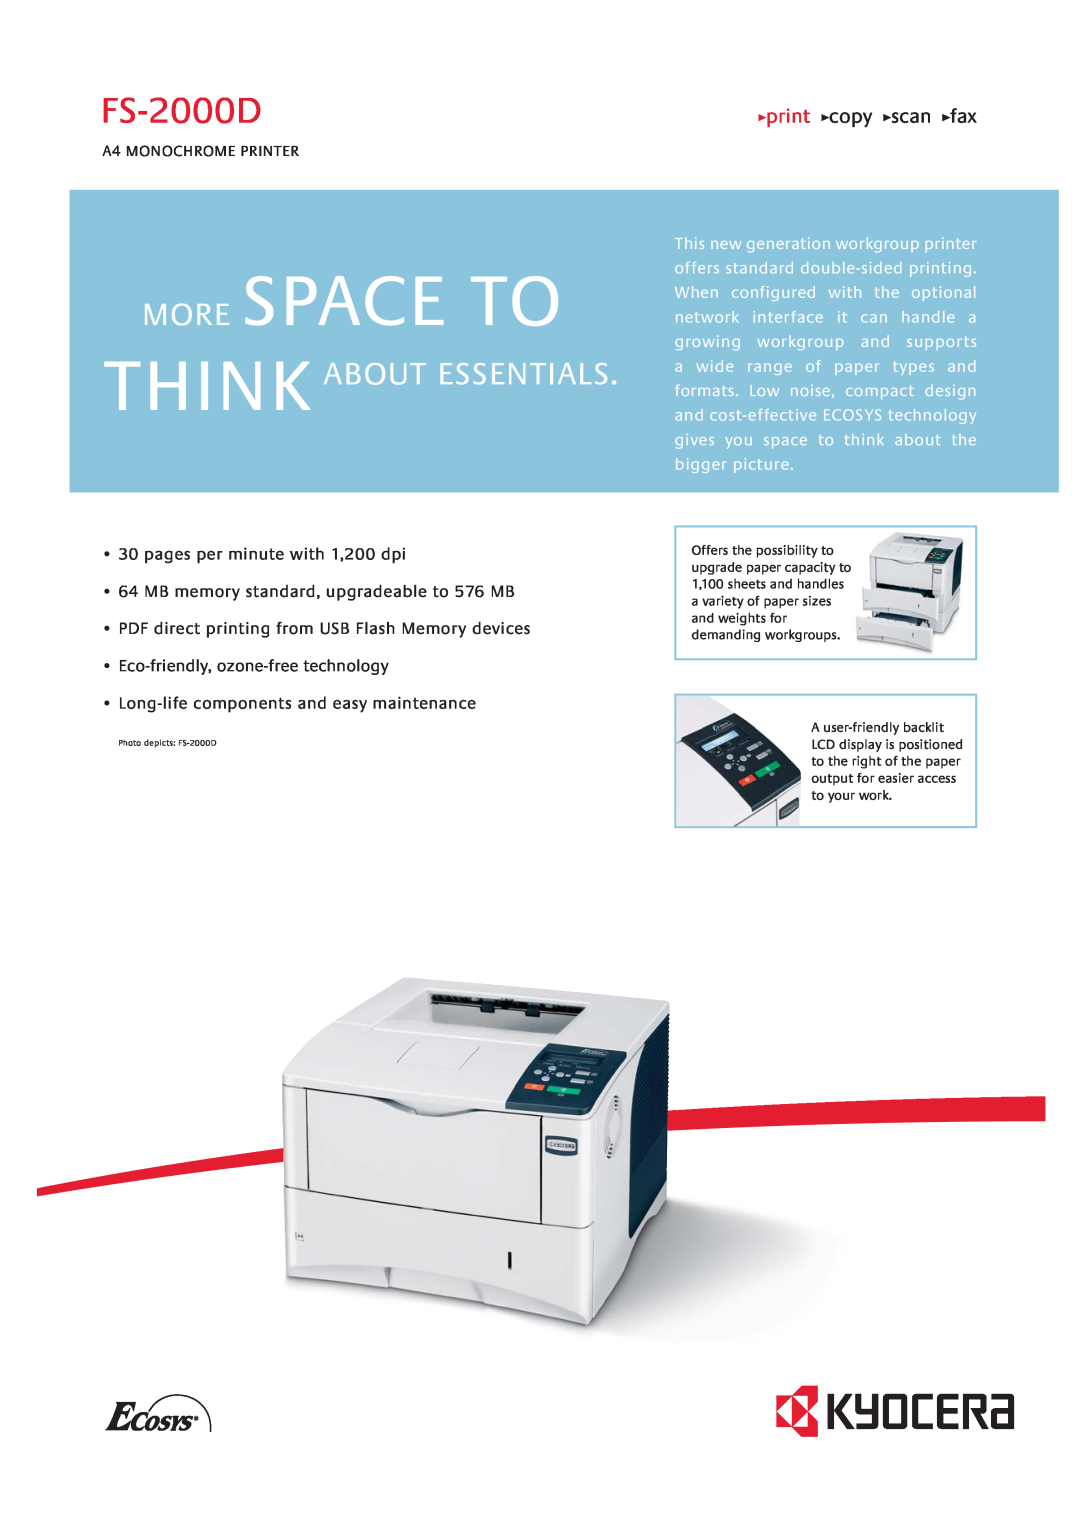 Kyocera manual FS-2000D, More Space To, Thinkabout Essentials, print copy scan fax, pages per minute with 1,200 dpi 